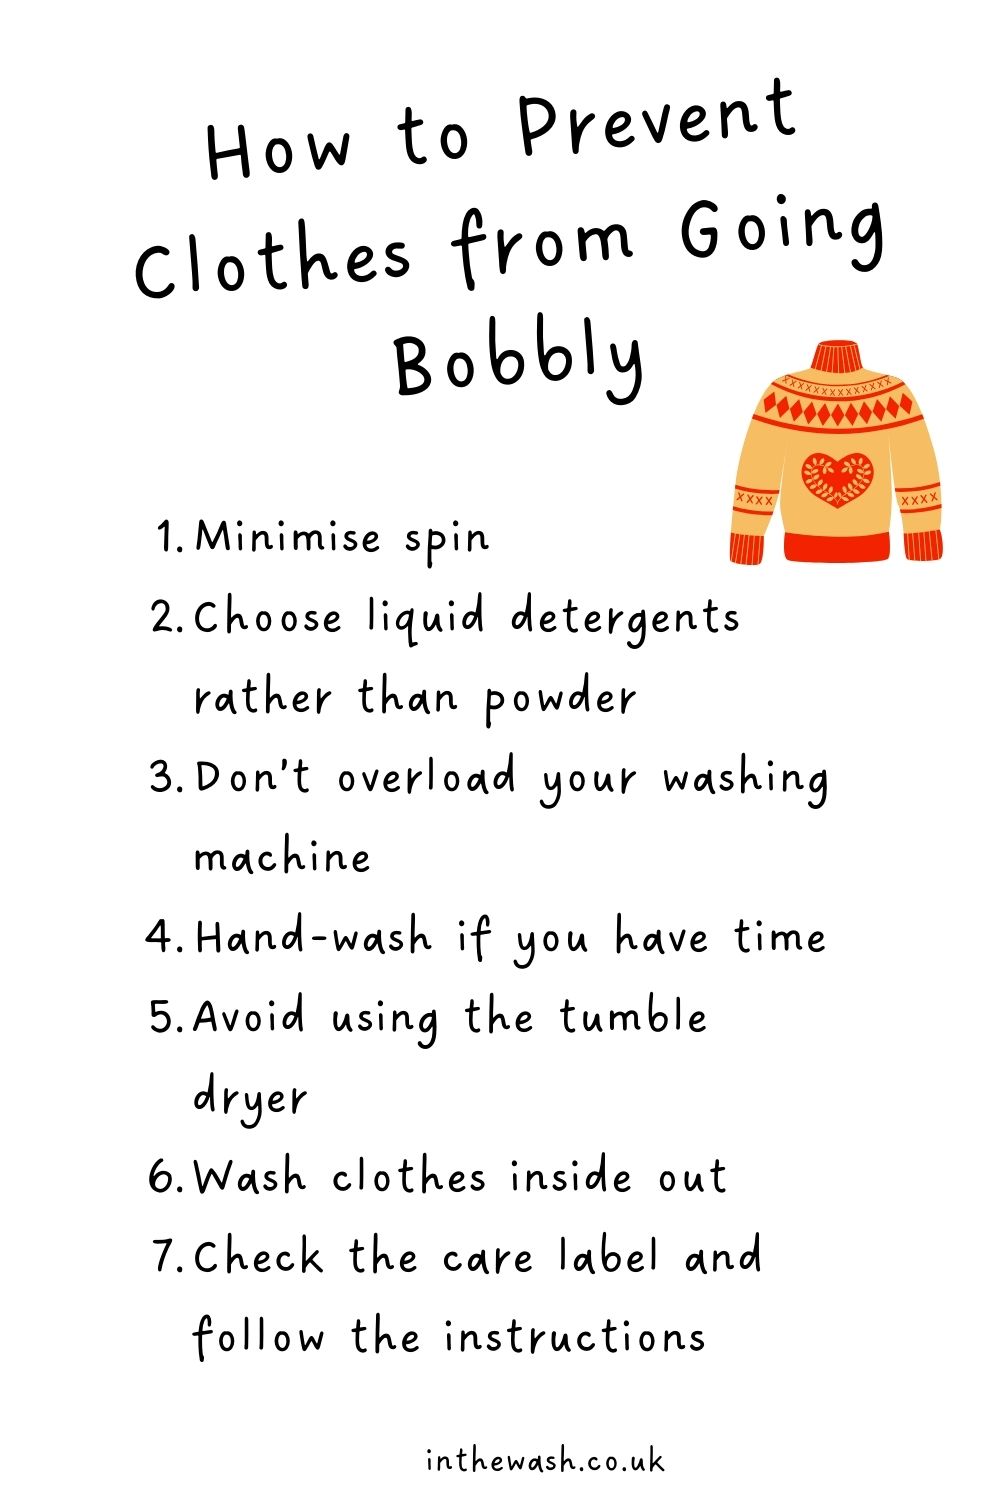 How to prevent clothes from going bobbly